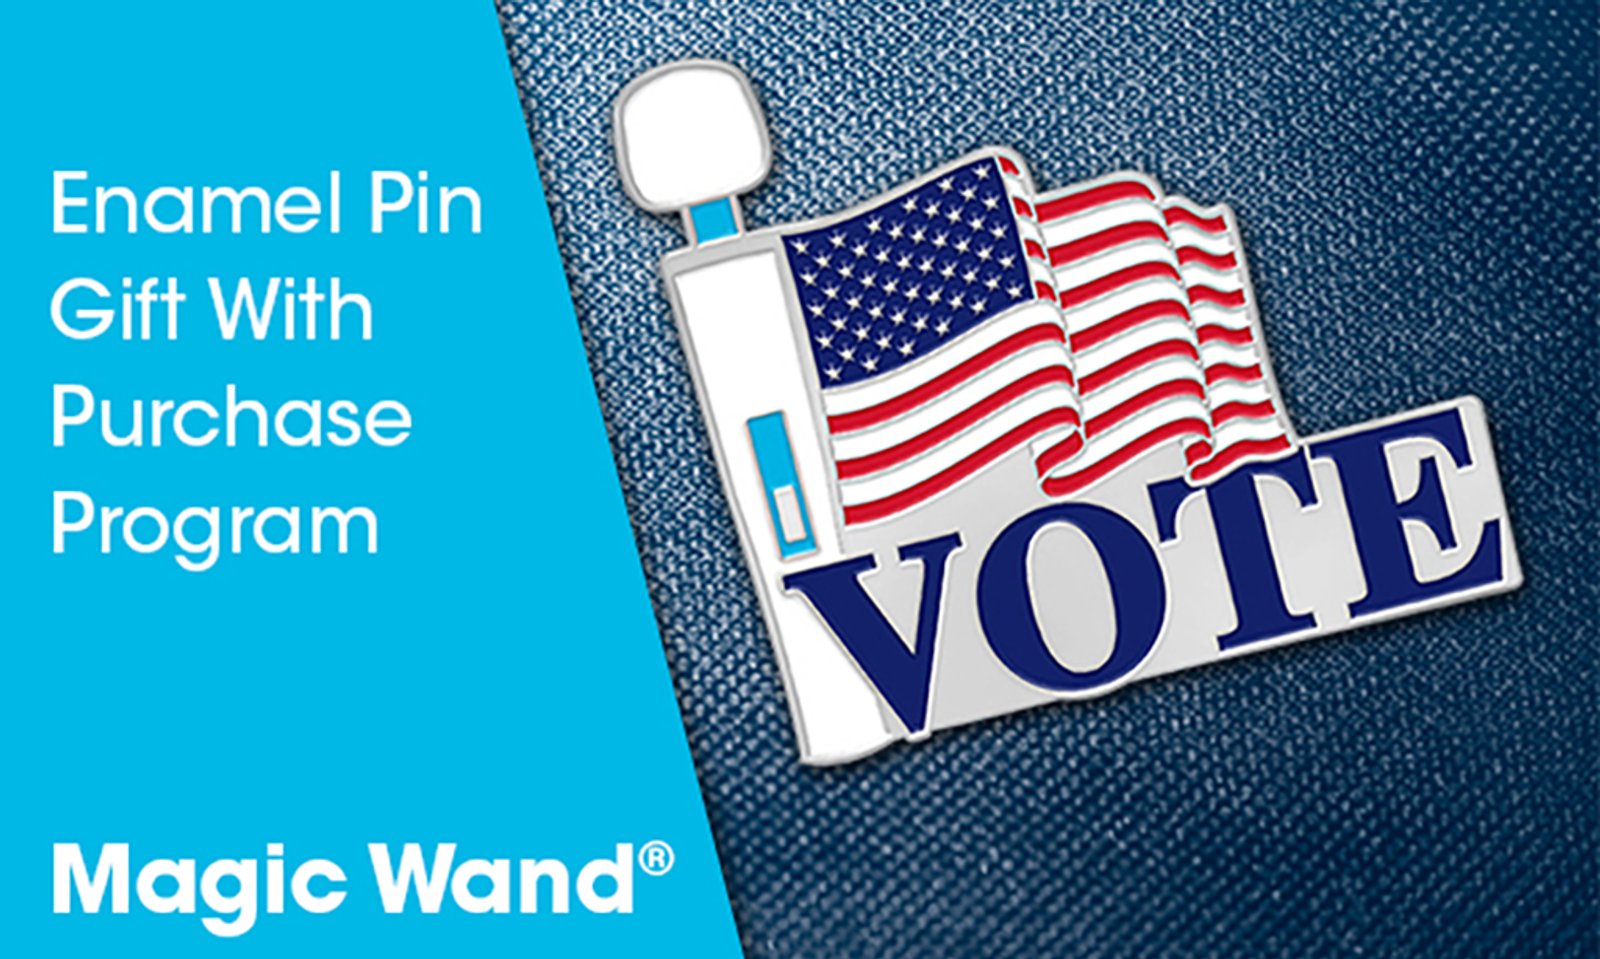 Magic Wand to Promote the Vote With Lapel Pin Giveaways